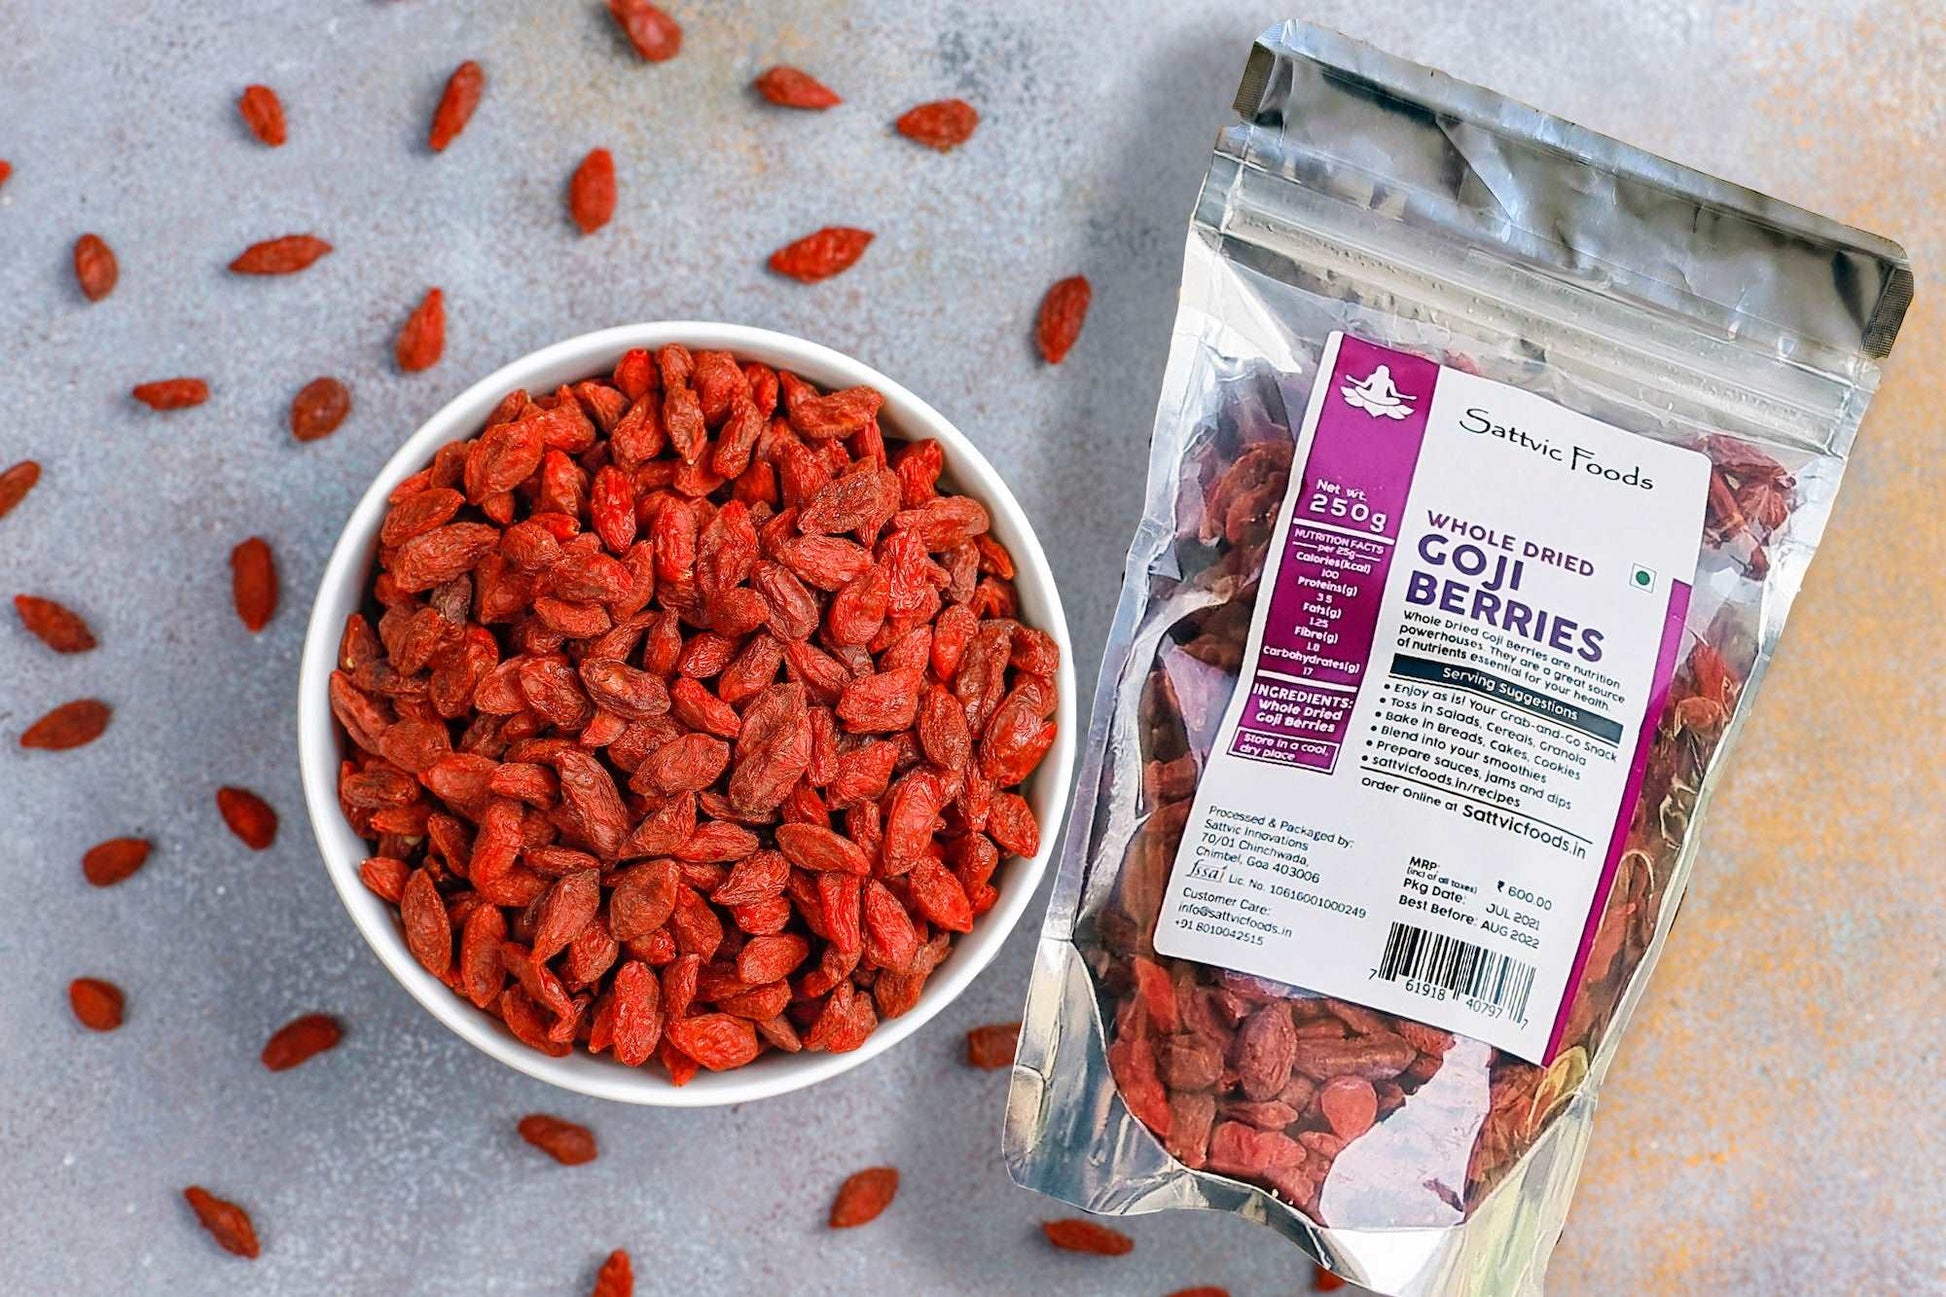 Goji Berries - Sattvic Foods - Loose with product